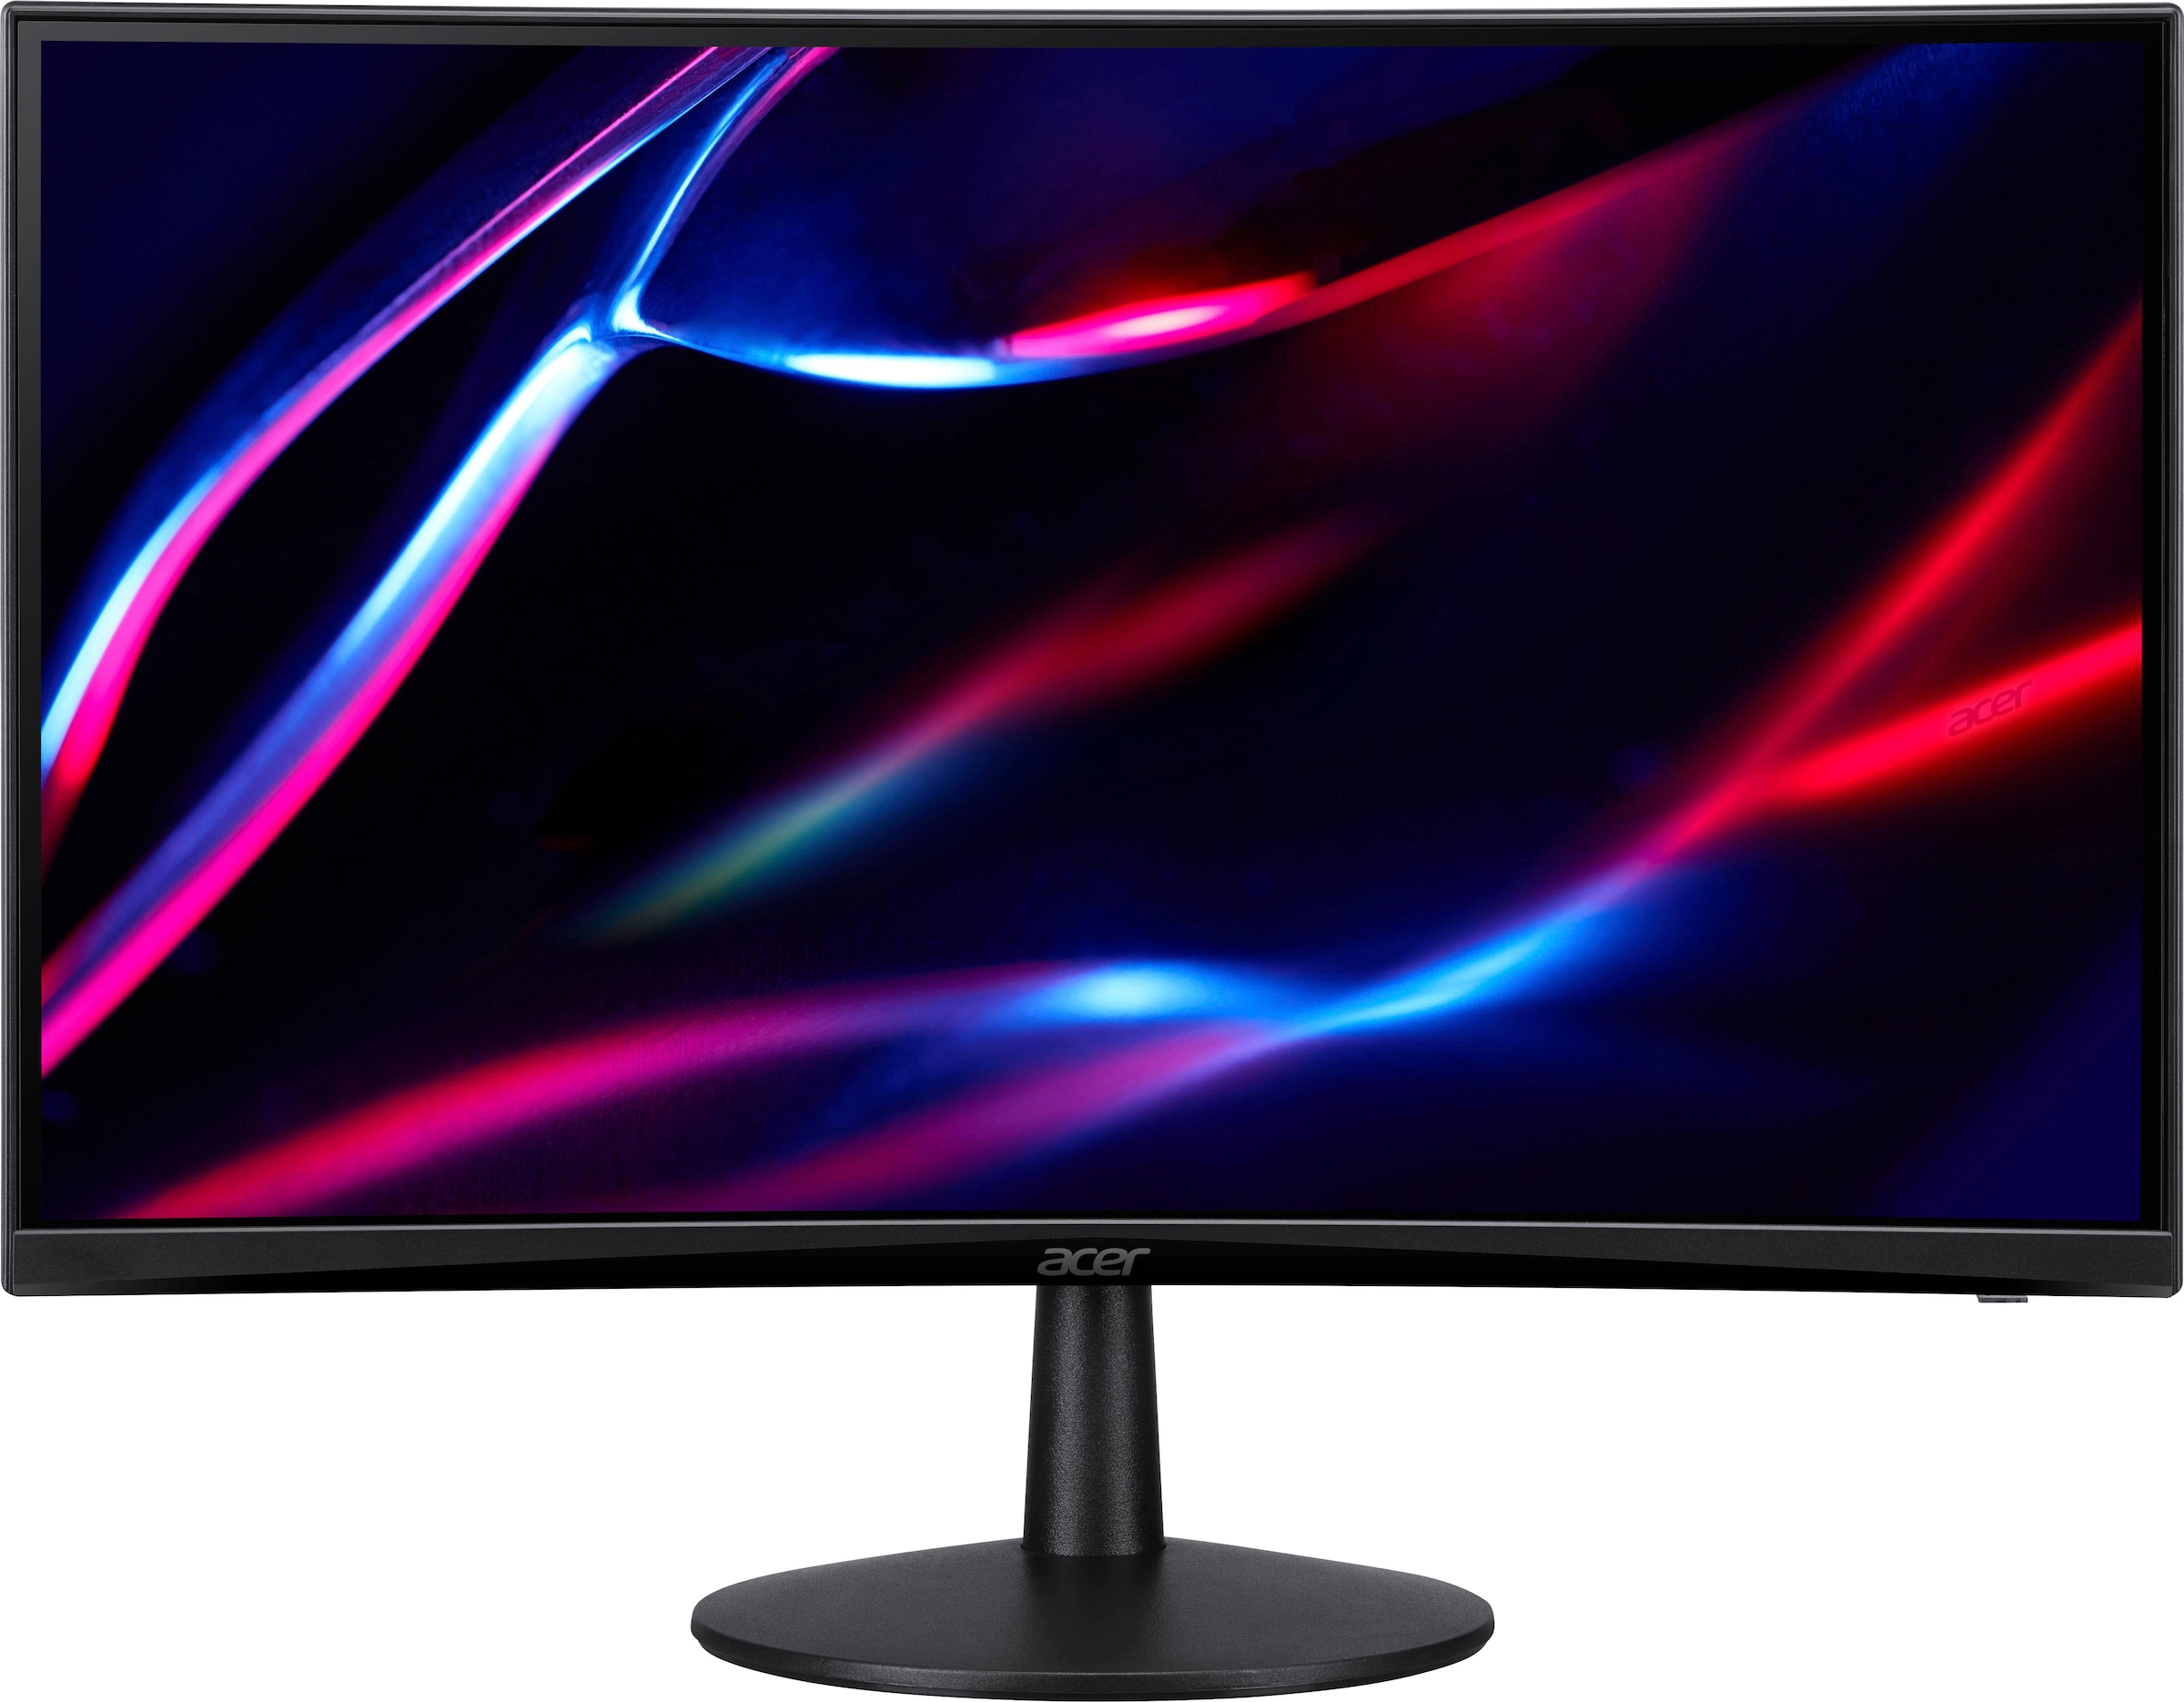 Acer Curved-Gaming-LED-Monitor »Nitro ED240Q S«, 59,9 cm/23,6 Zoll, 1920 x 1080 px, Full HD, 1 ms Reaktionszeit, 180 Hz